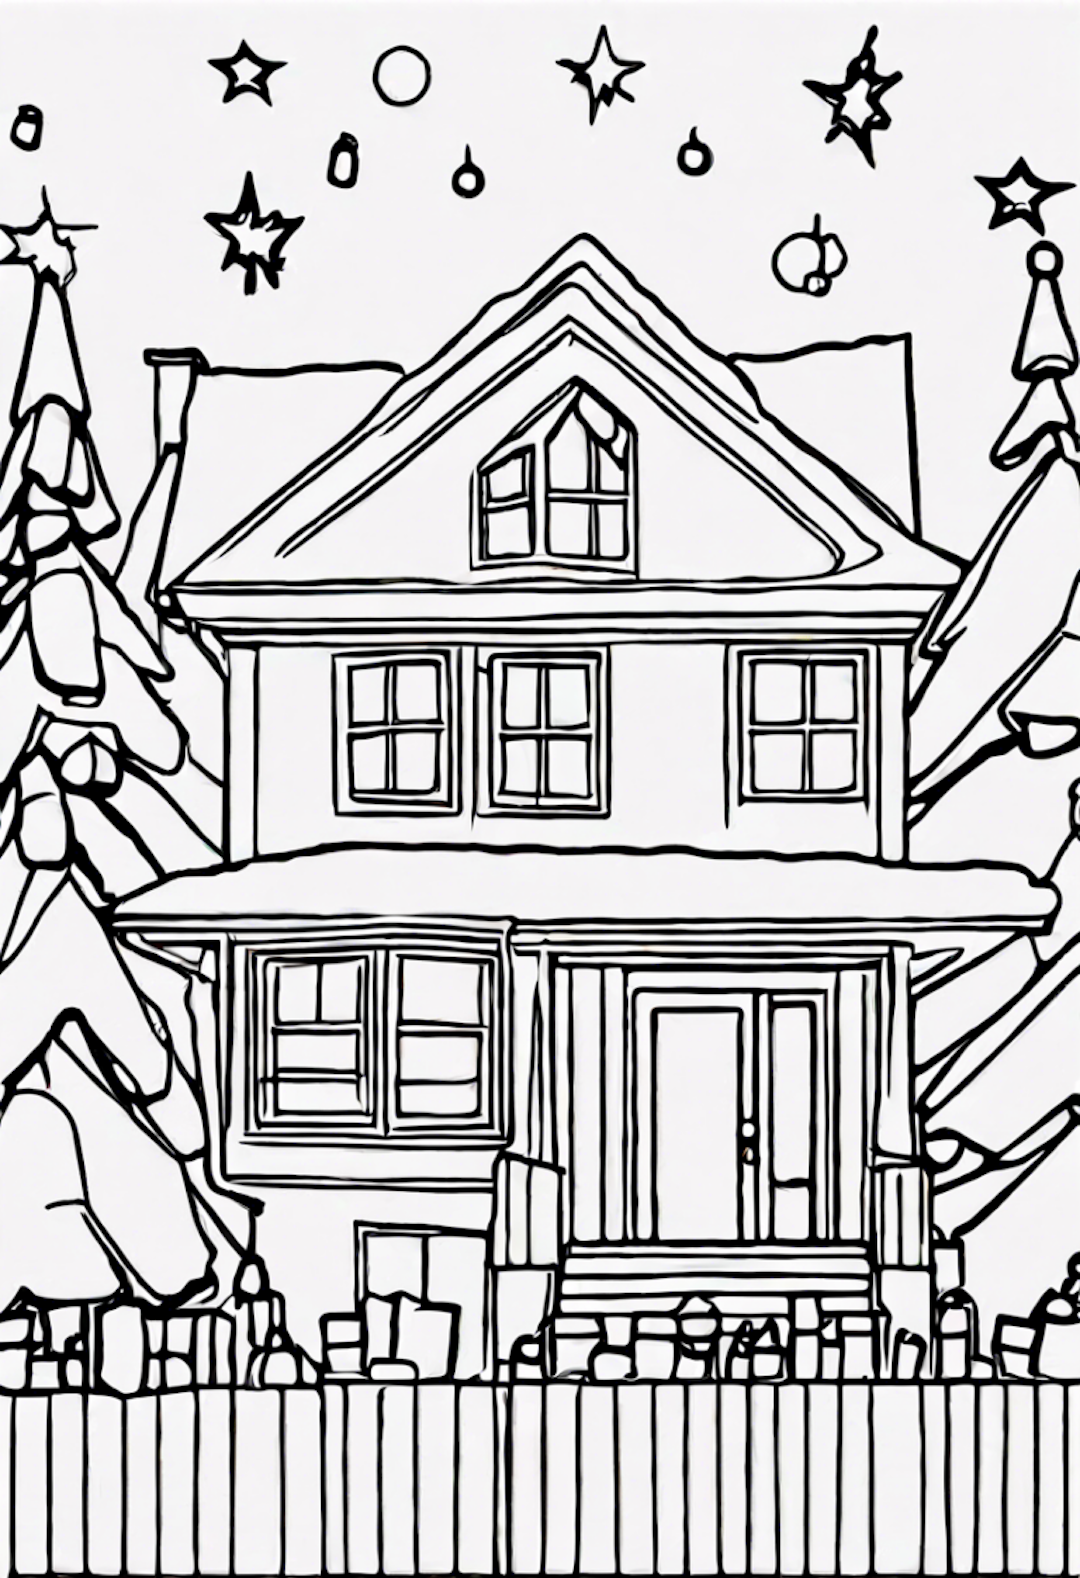 Winter Wonderland House Coloring Page coloring pages